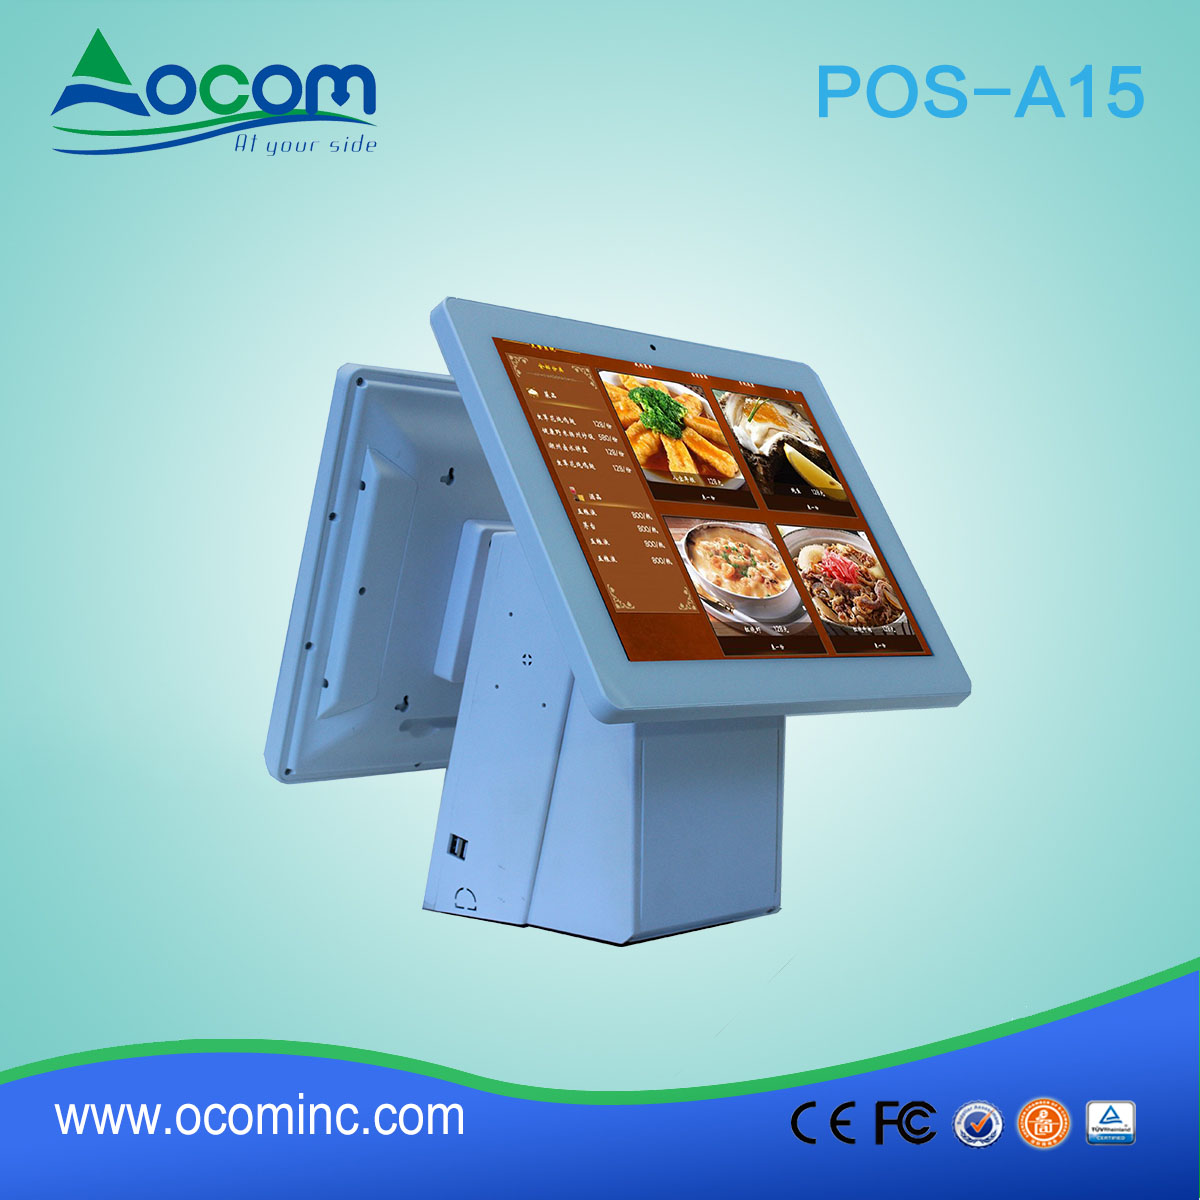 POS-A15 electronic cash register/ pos pc touch screen all in one with printer